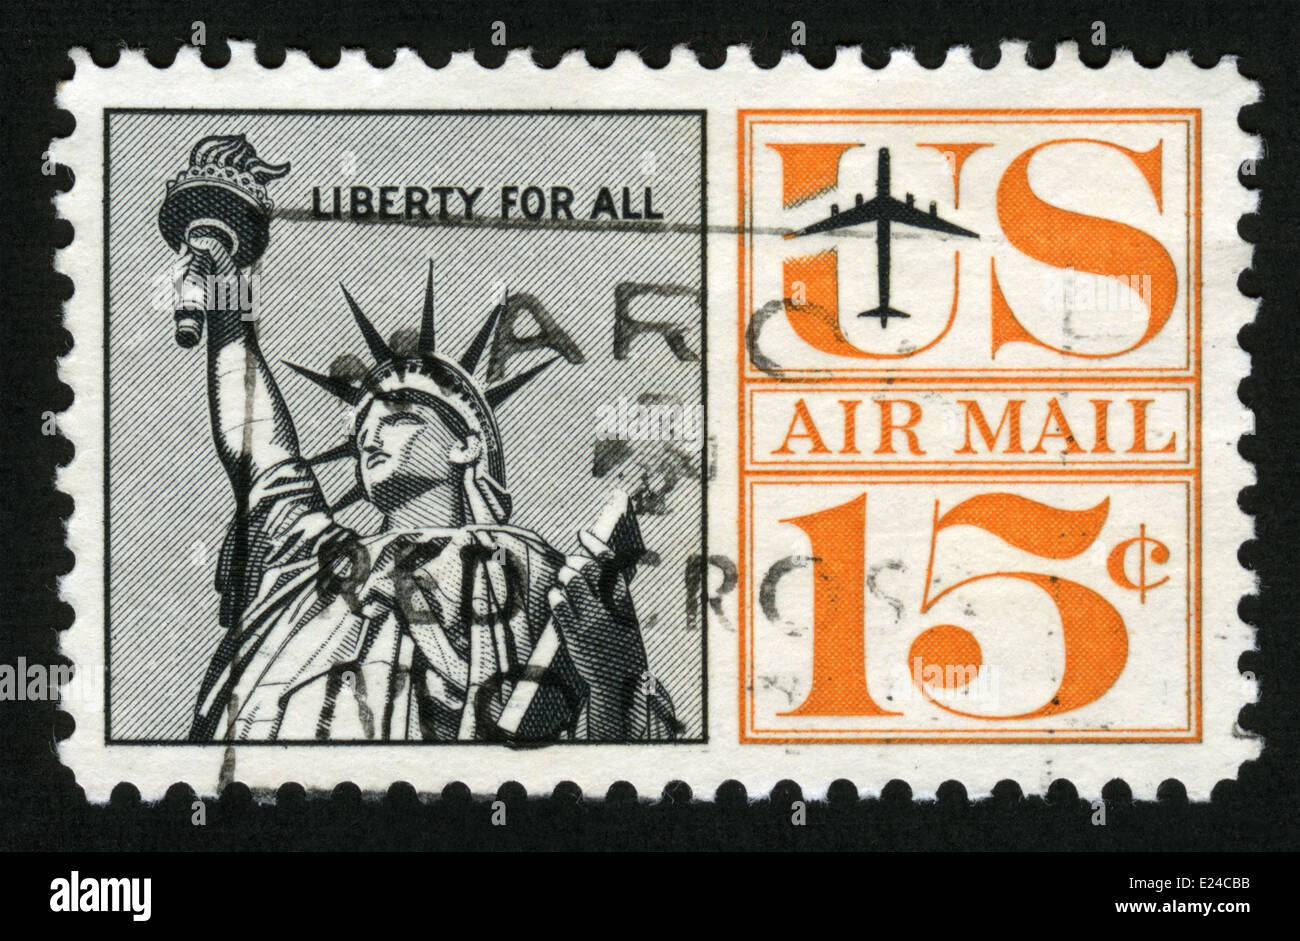 book of U.S. forever postage stamps Stock Photo - Alamy